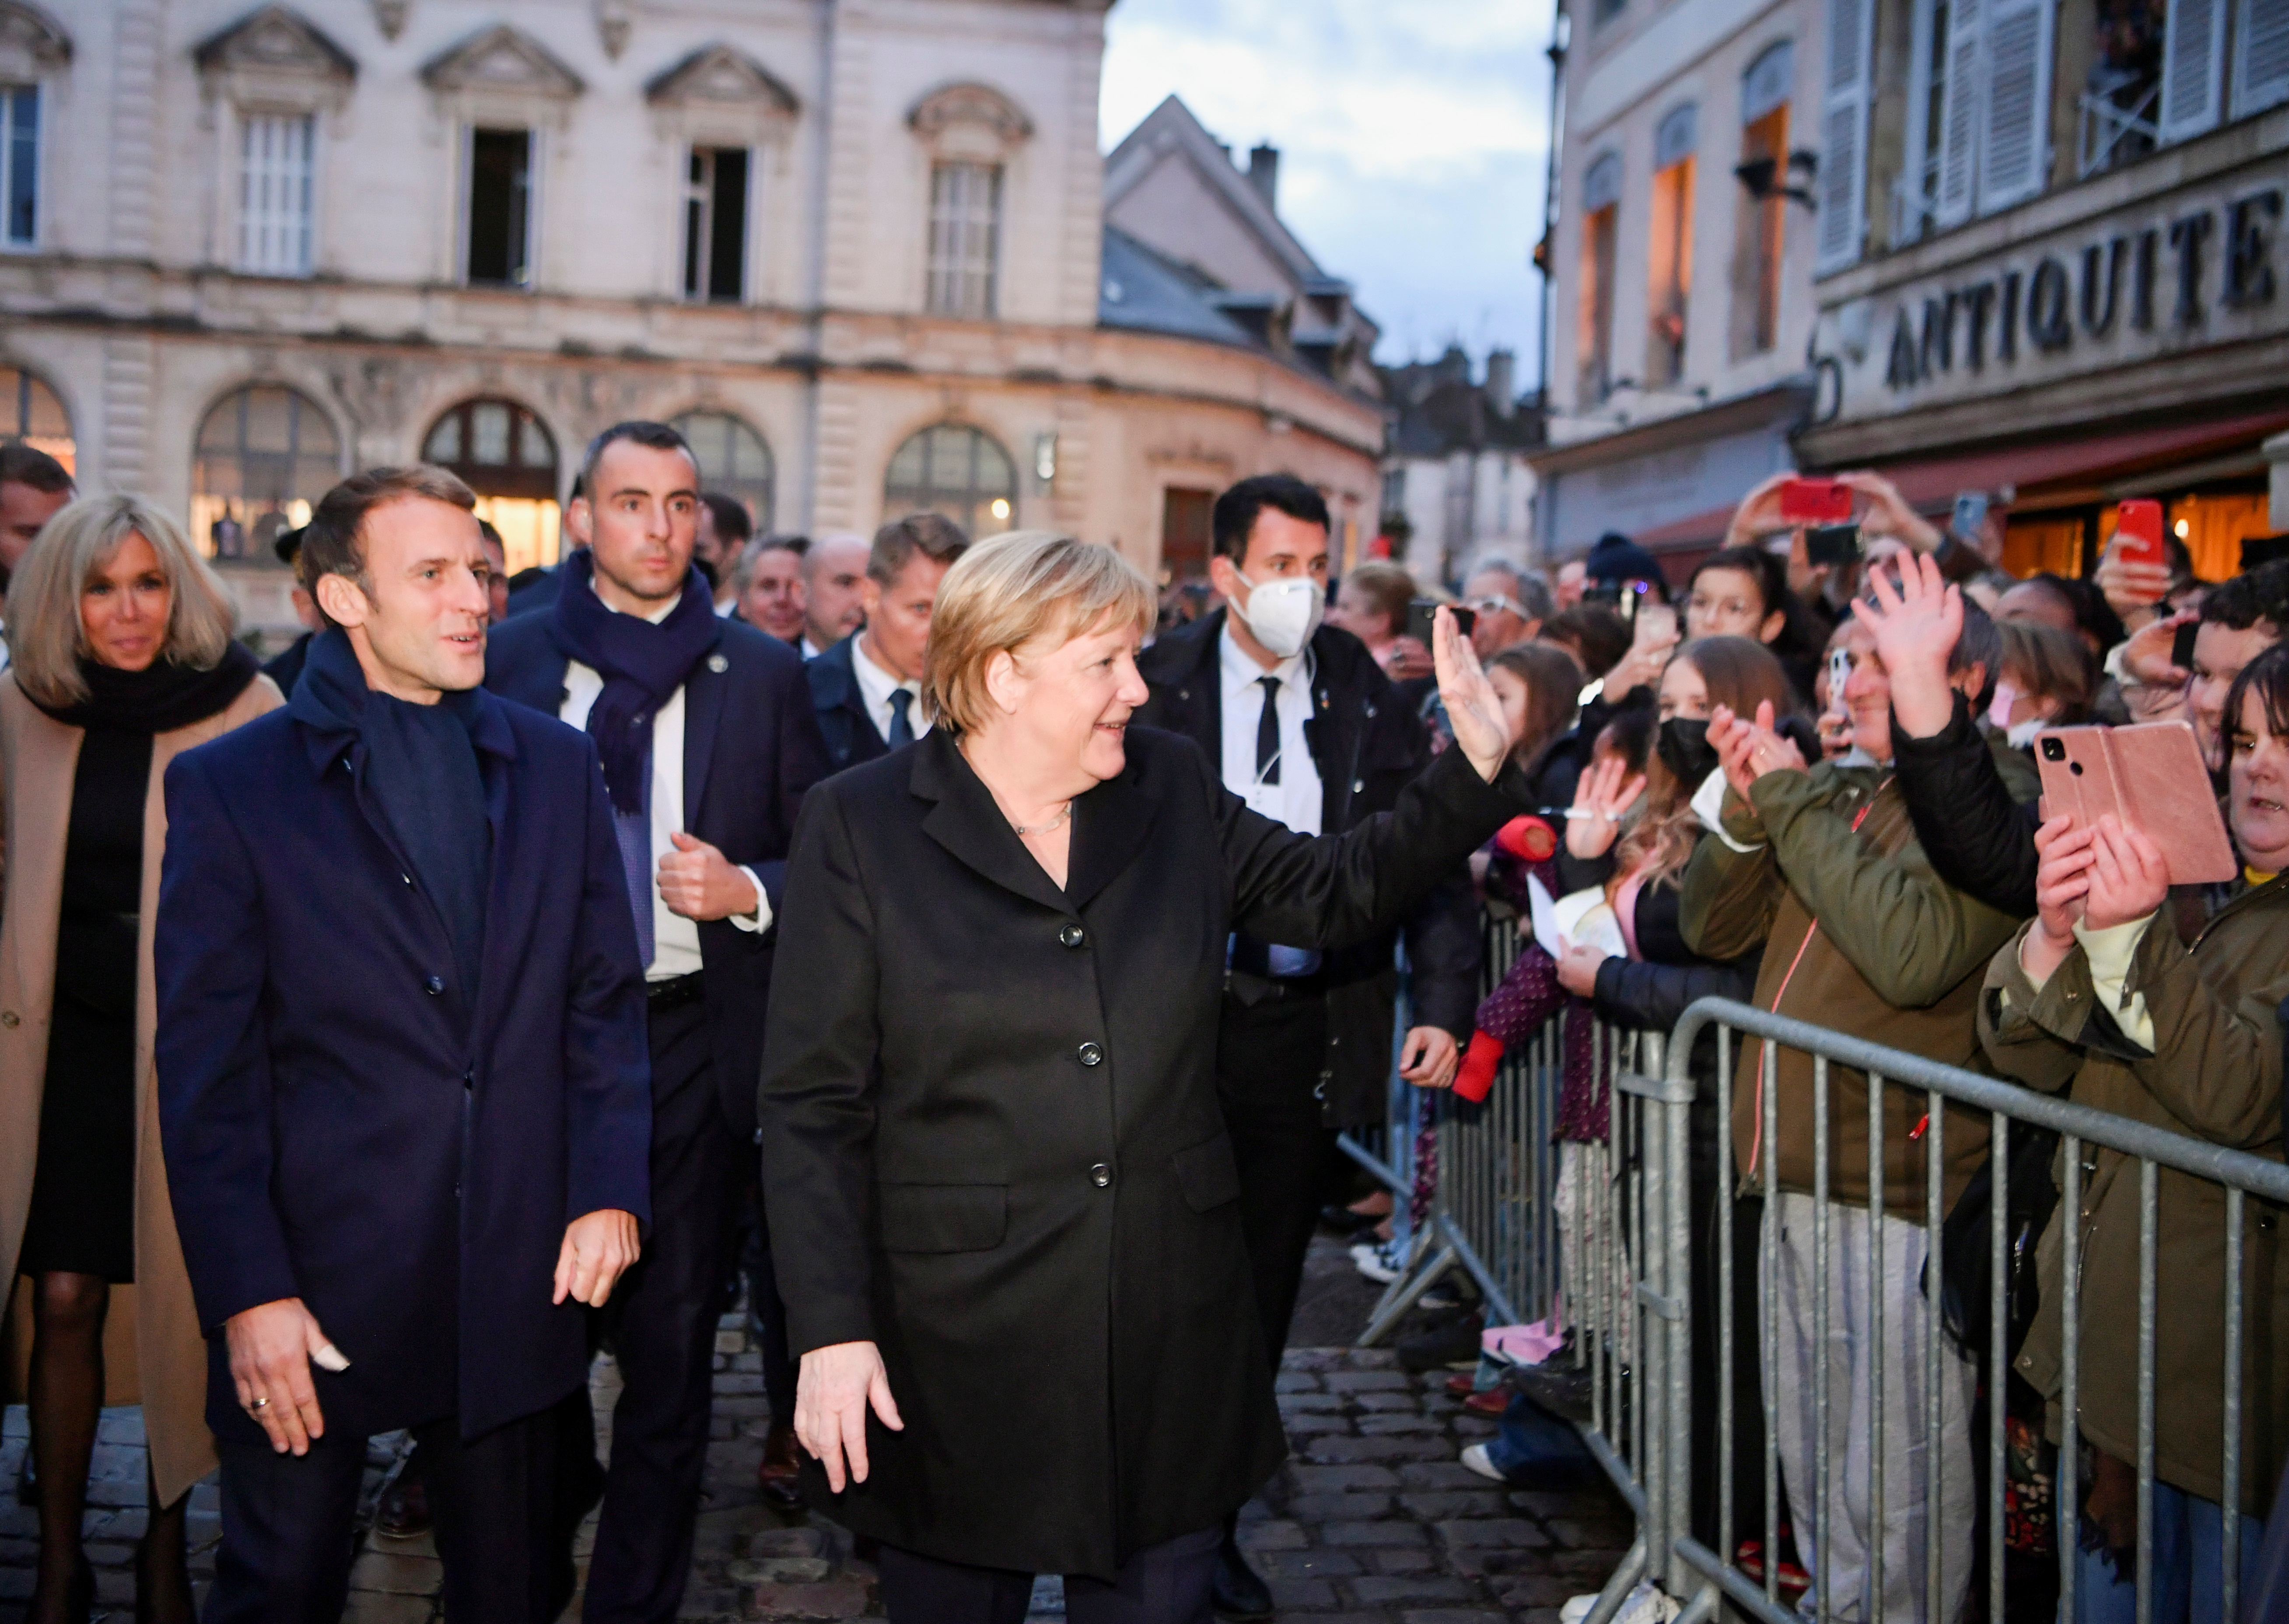 France's President Emmanuel Macron, flanked by his wife Brigitte Macron, arrives for talks with outgoing German Chancellor Angela Merkel, in Beaune, France, November 3, 2021. Philippe Desmazes/Pool via REUTERS